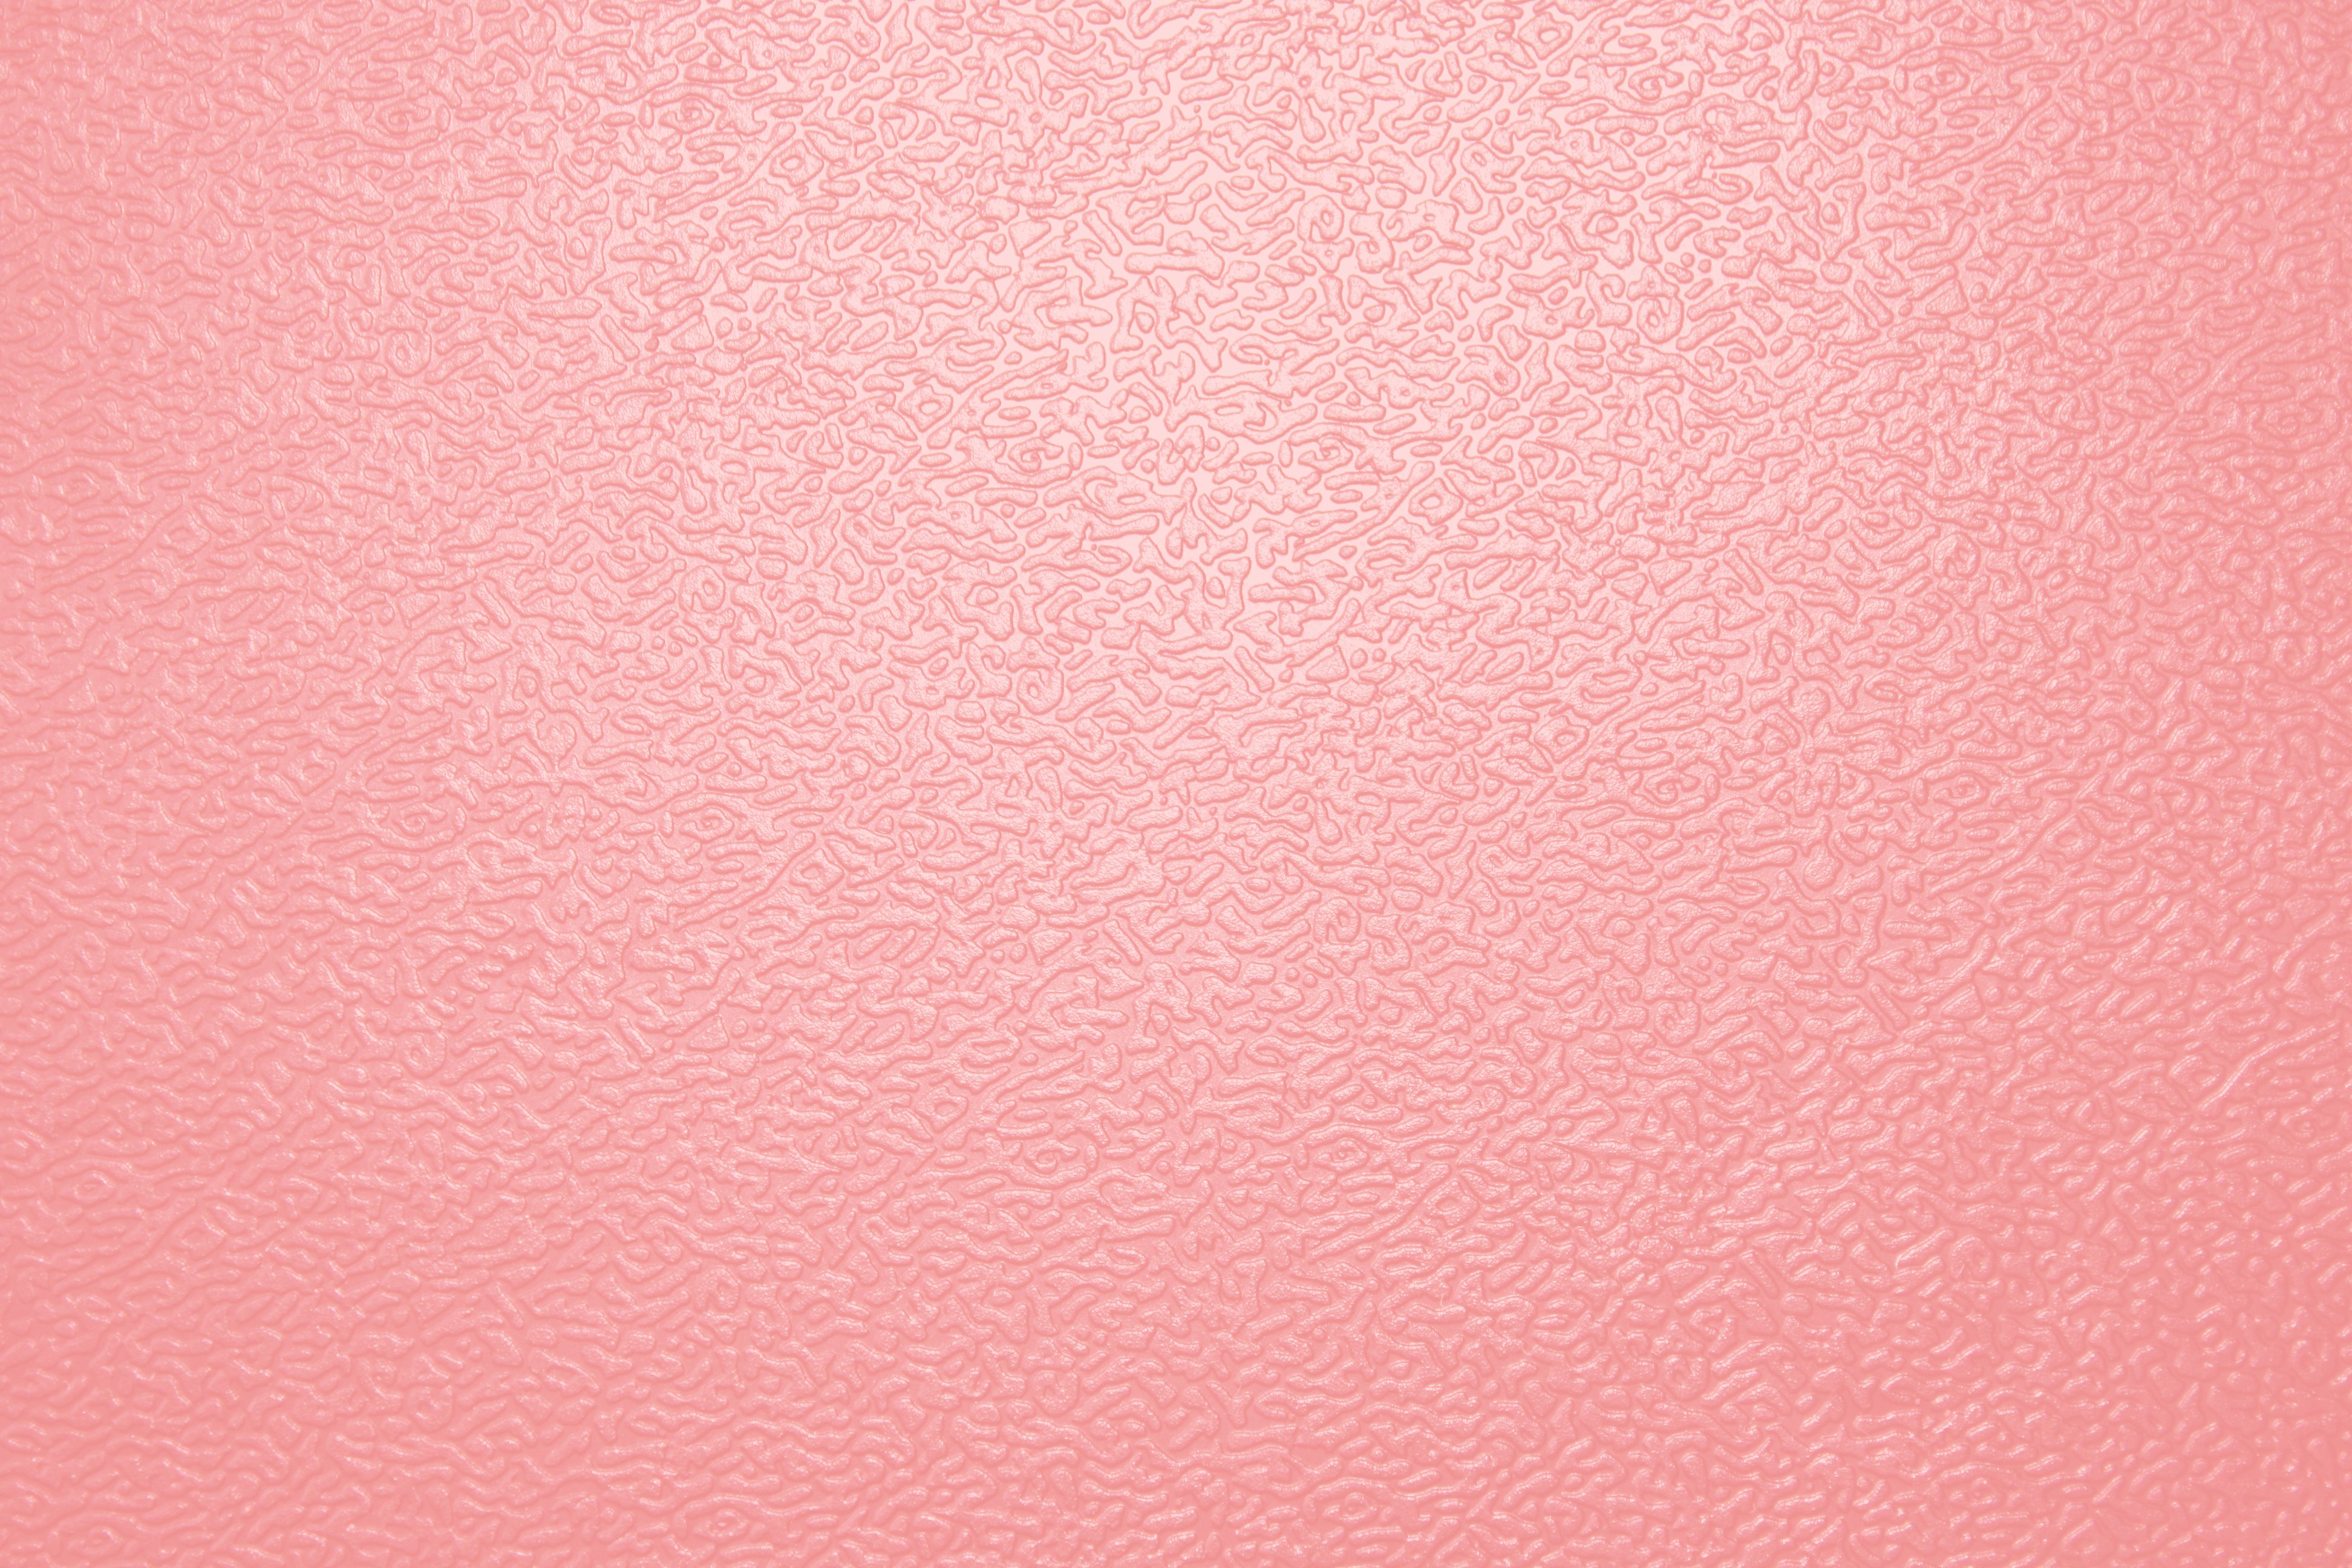 Textured Salmon Pink Colored Plastic Close Up Picture ...